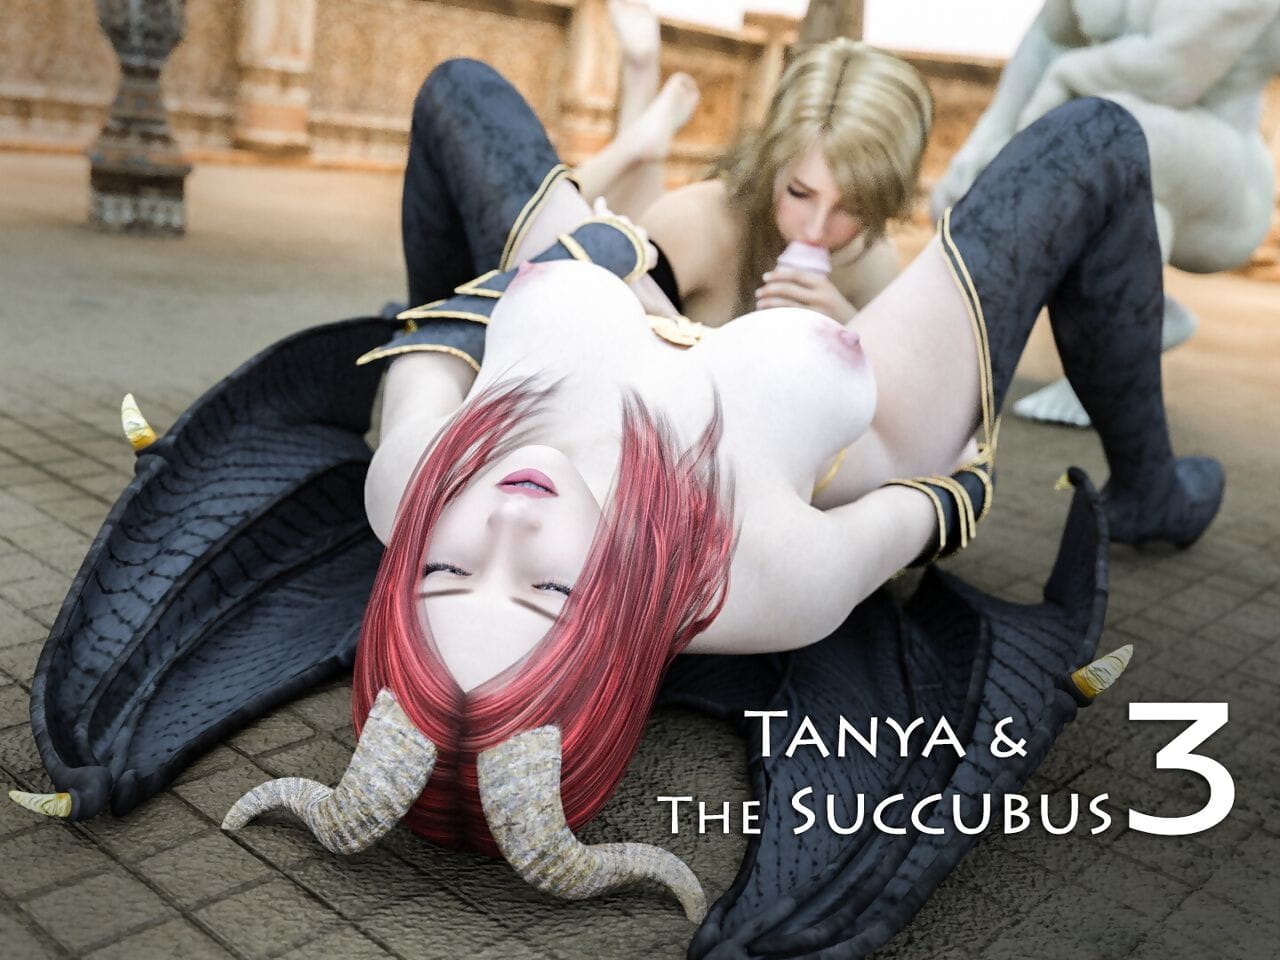 Tanya & The Succubus 3 Textless